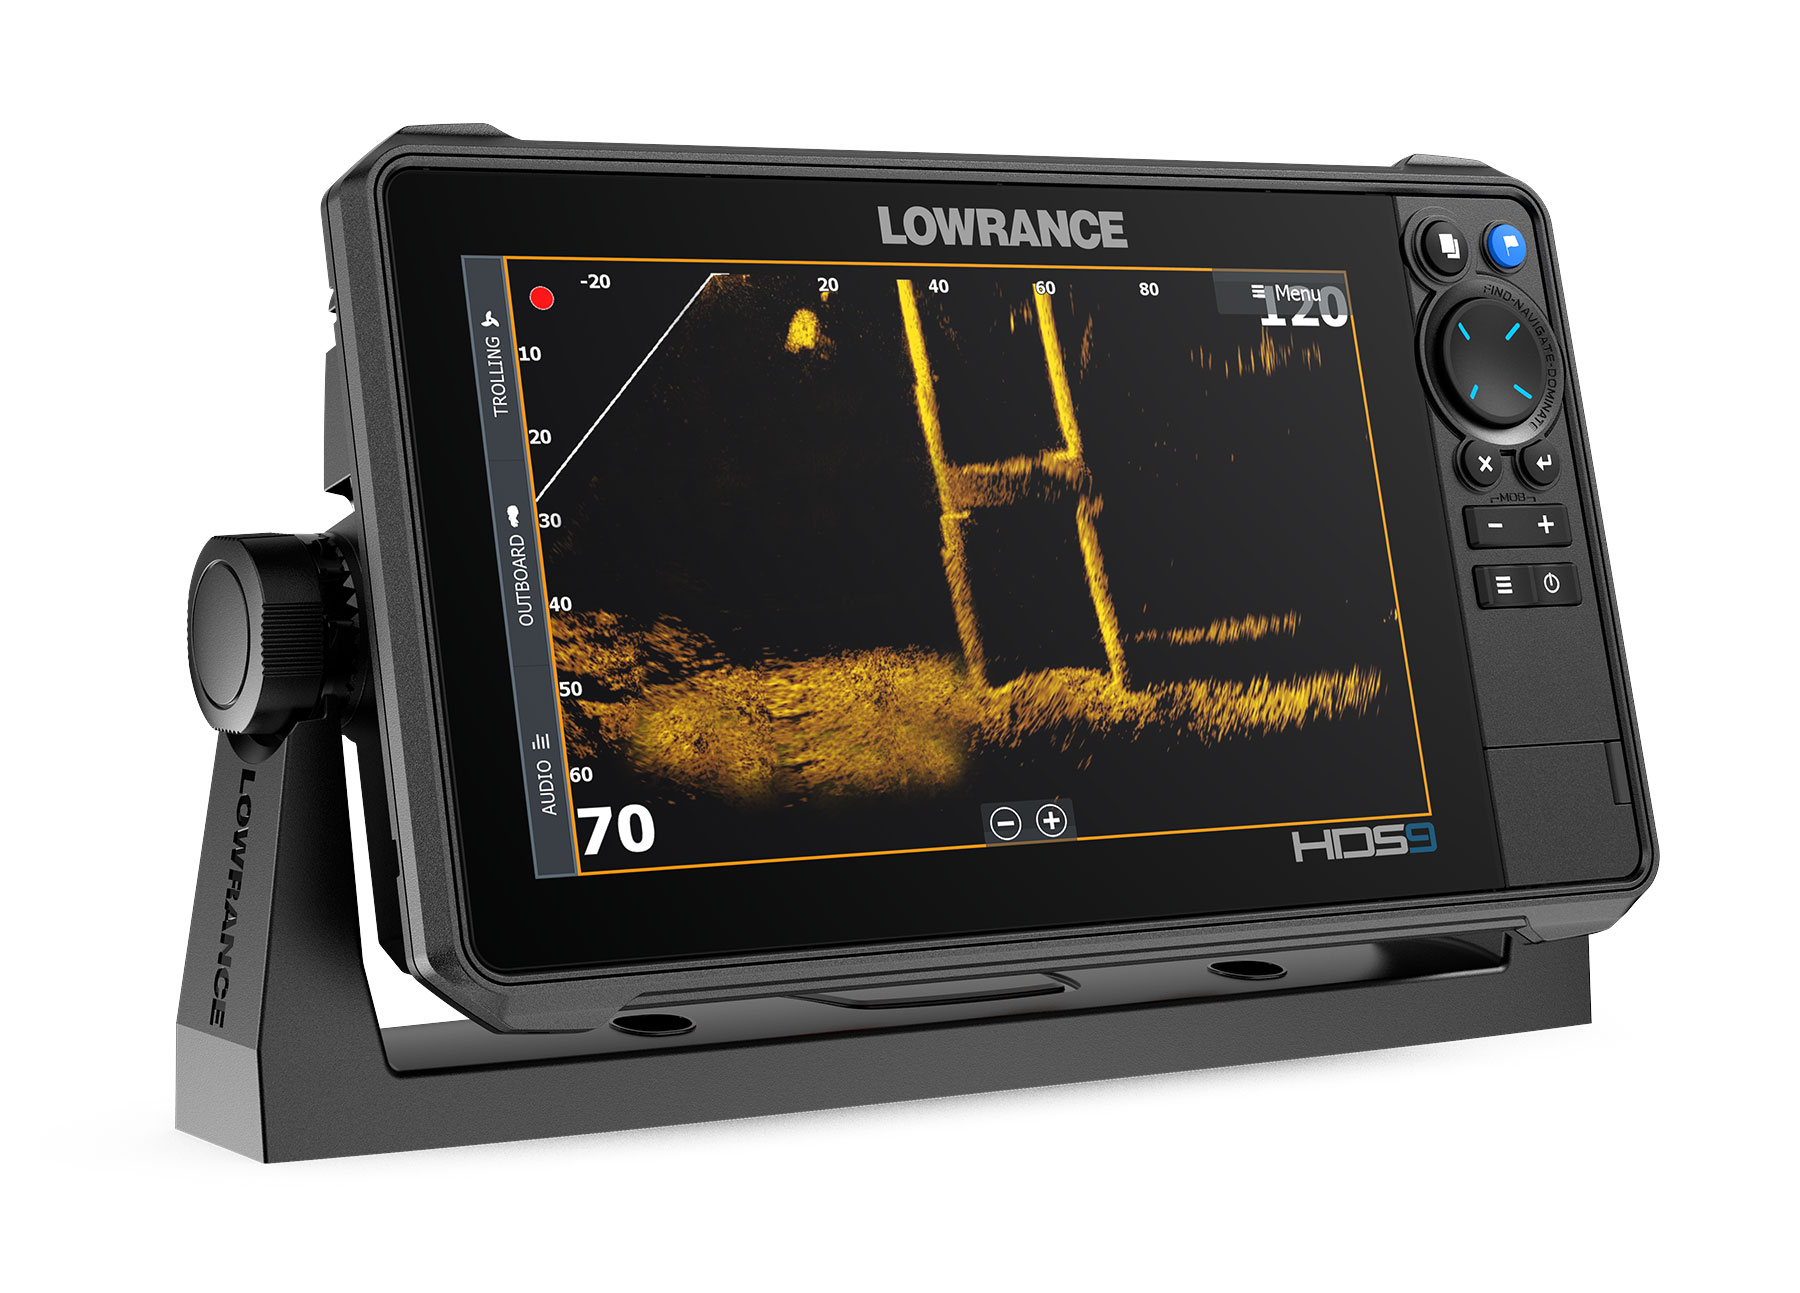 Lowrance Protective Cover for 10 HDS